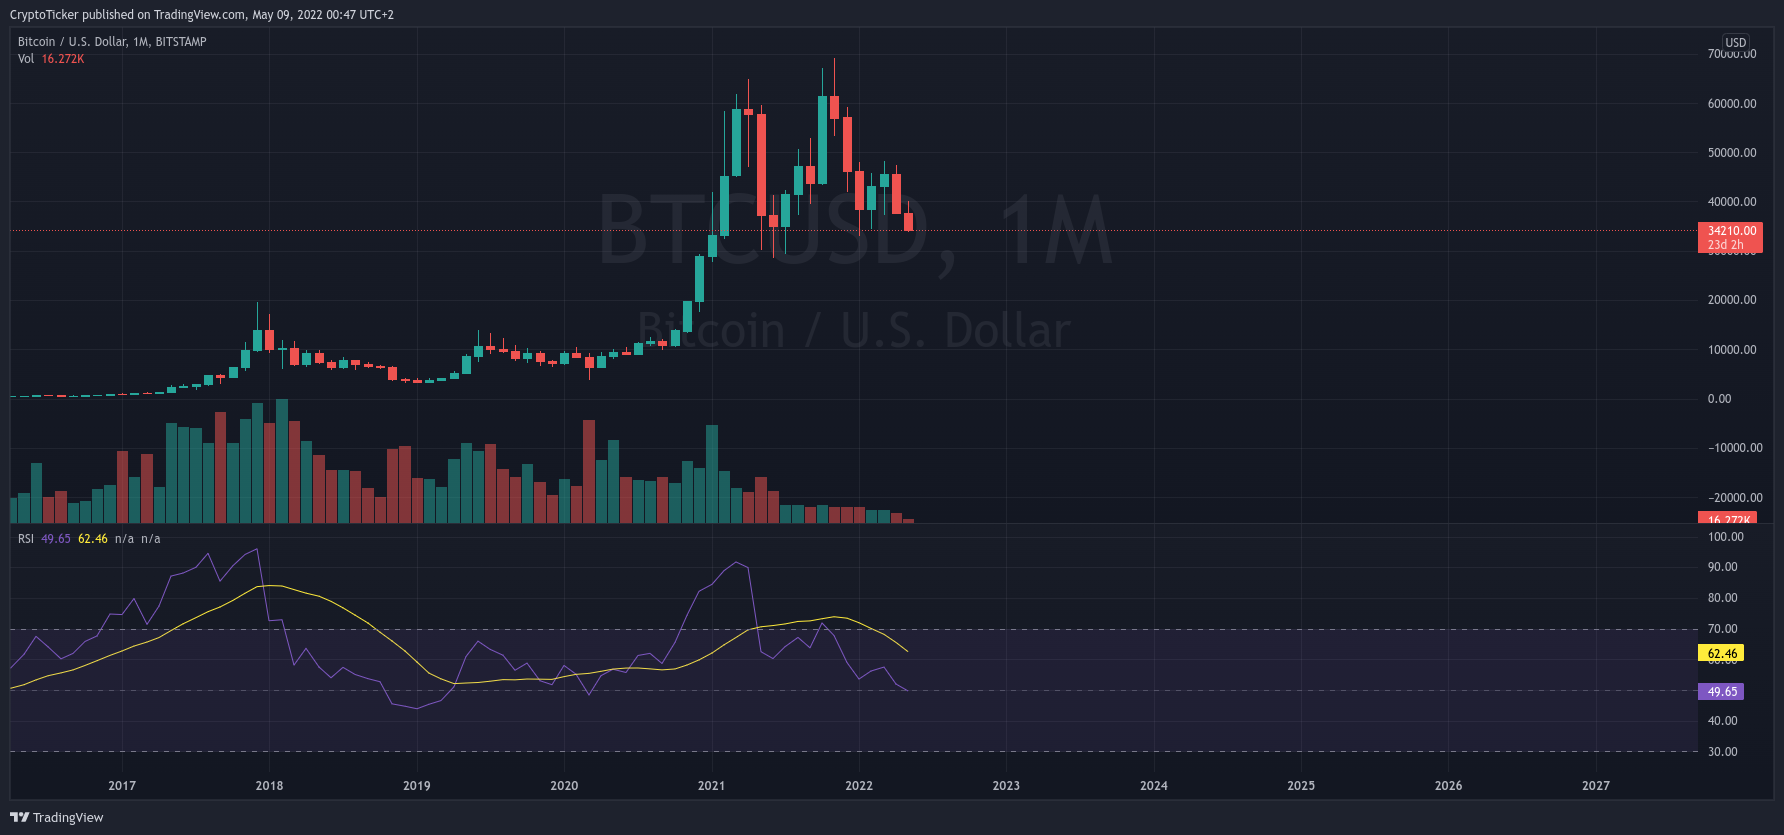 Forecast for Bitcoin price: BTC/USD 1-month chart showing BTC prices since 2017